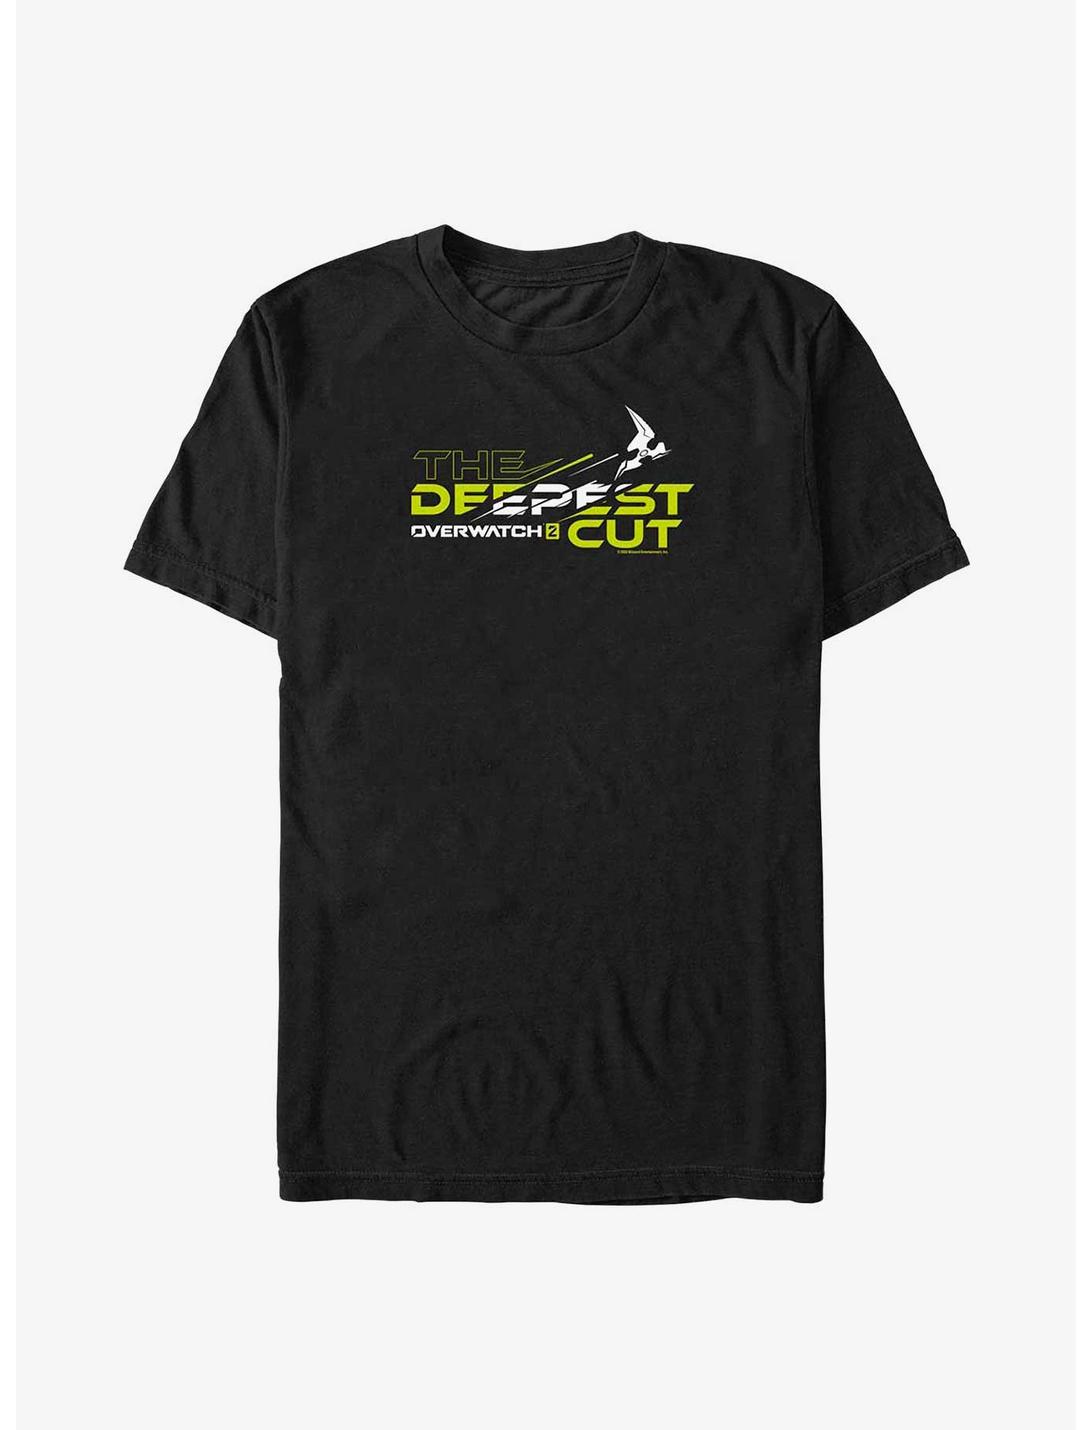 Overwatch 2 The Deepest Cut T-Shirt, BLACK, hi-res